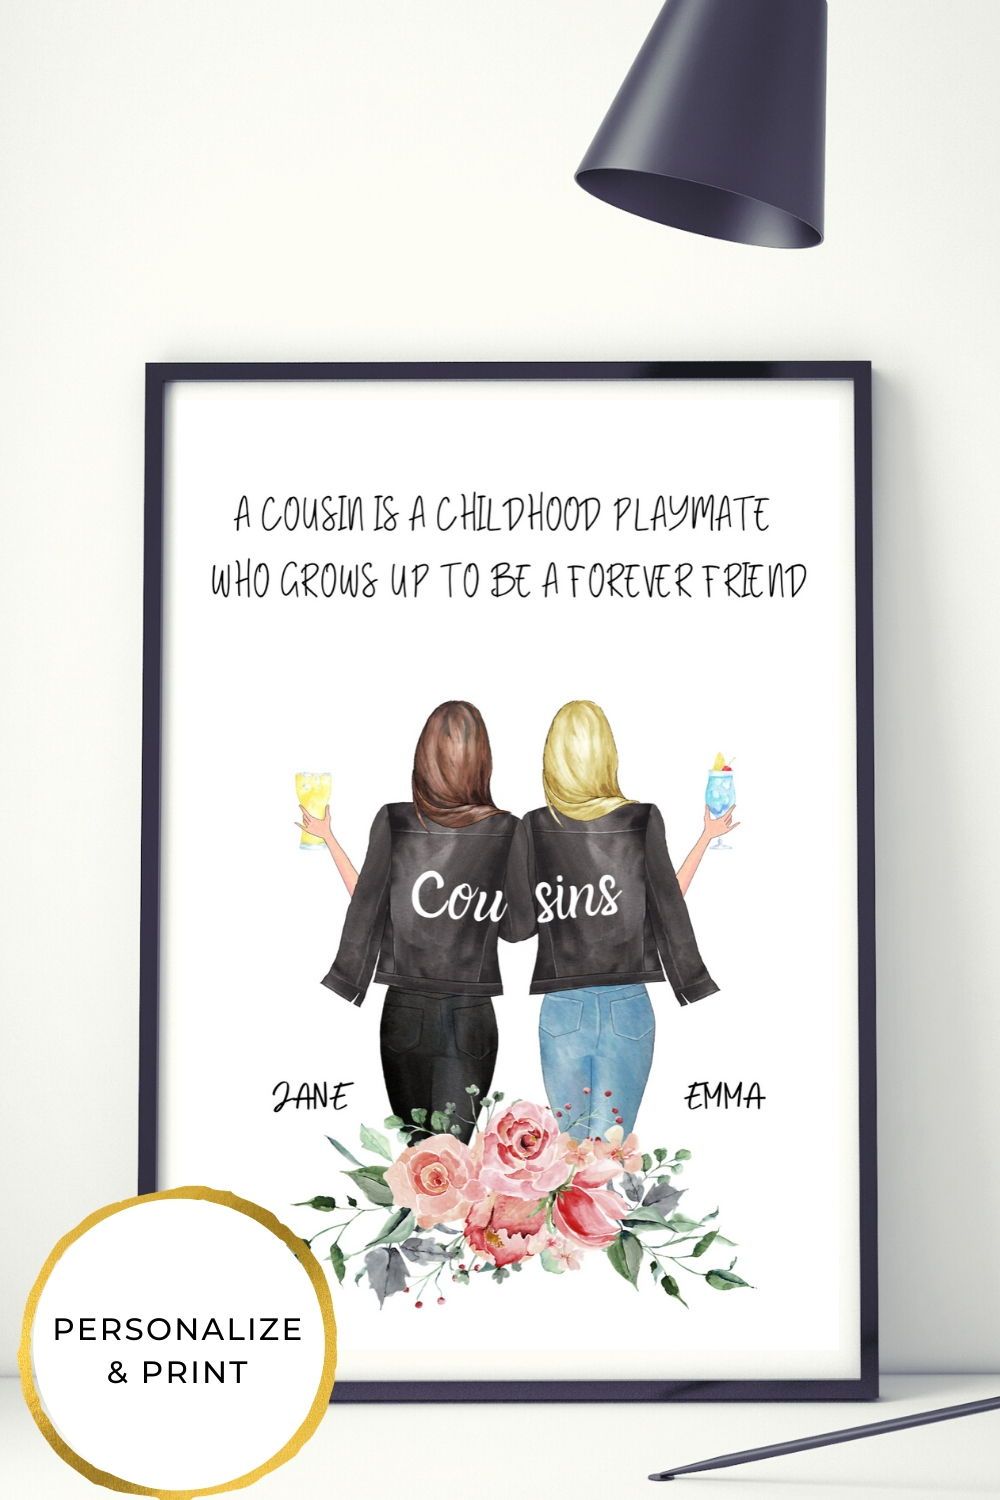 Customized gift ideas for surprising your cousin's birthday